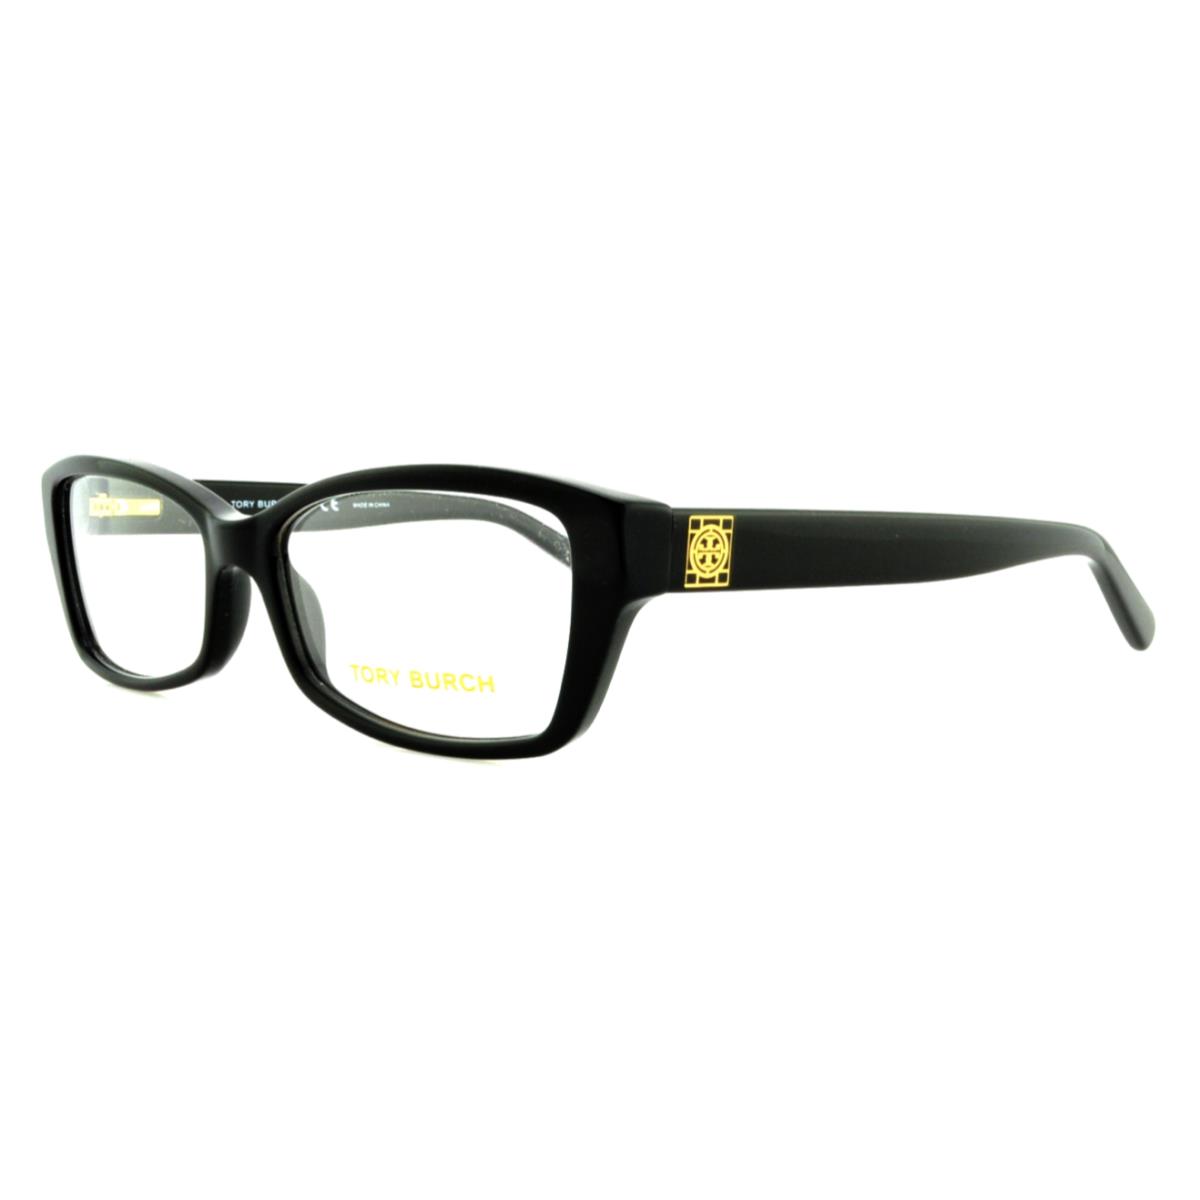 Tory Burch Rx-able Eyeglasses TY 2041 501 51-15 Classic Black Gold Frames